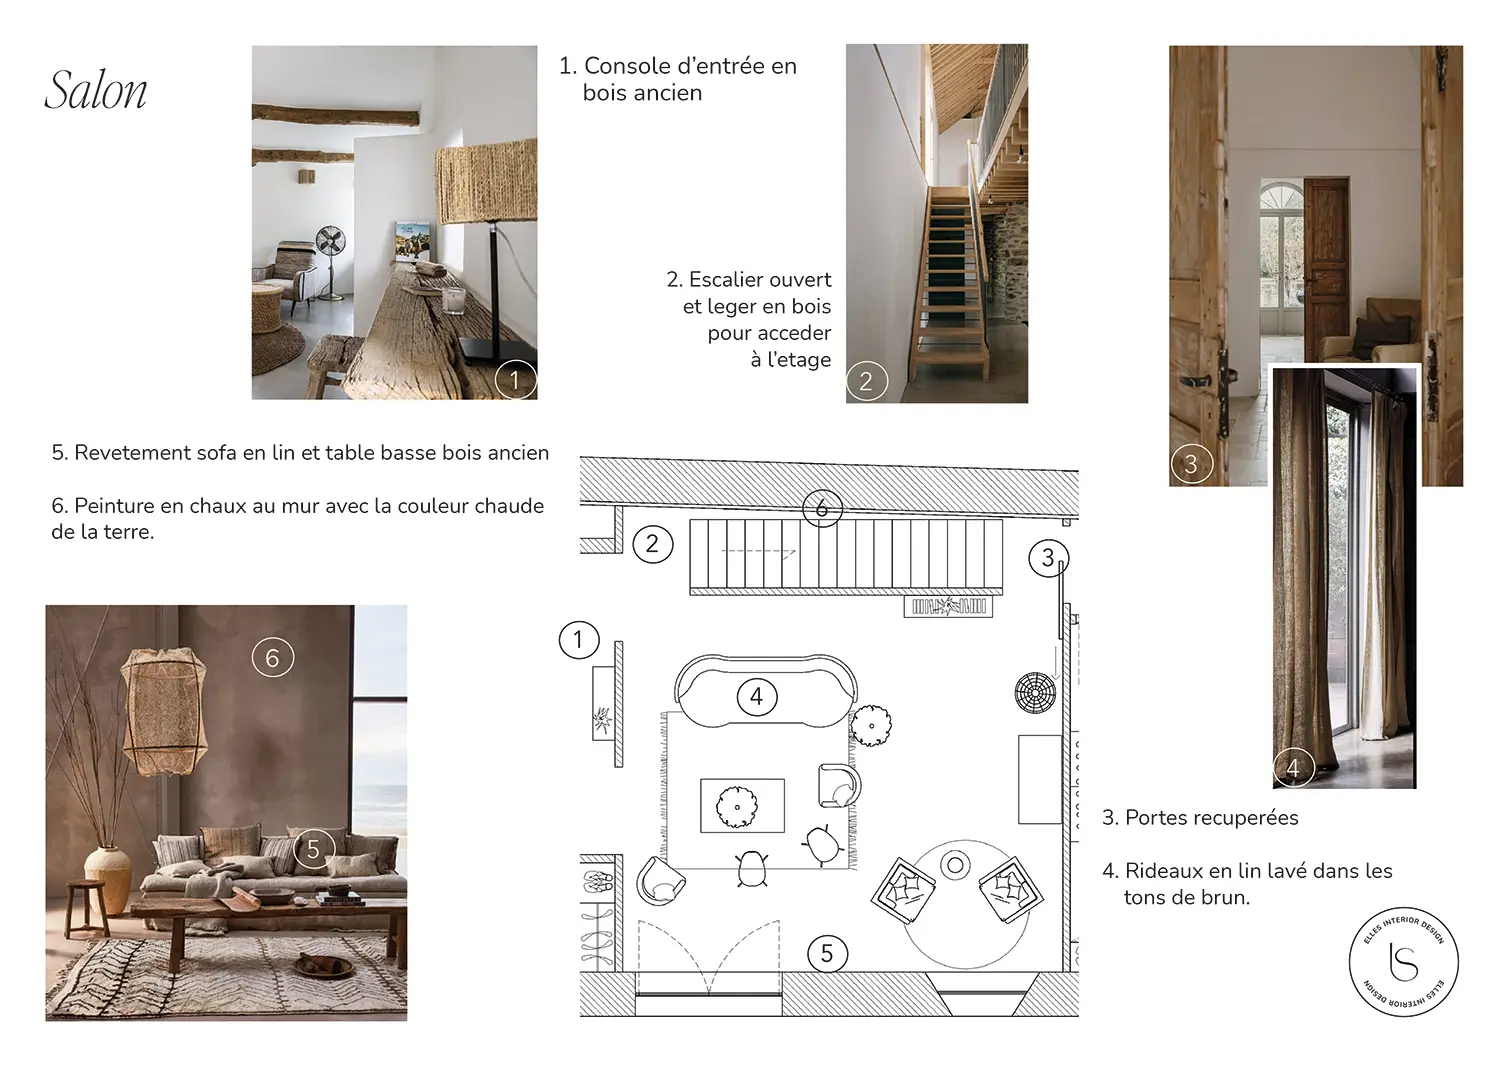 Mood board that guided the distribution of the interior layout of the renovation consultancy Cascina in Auvergne, by Elles Interior Design.